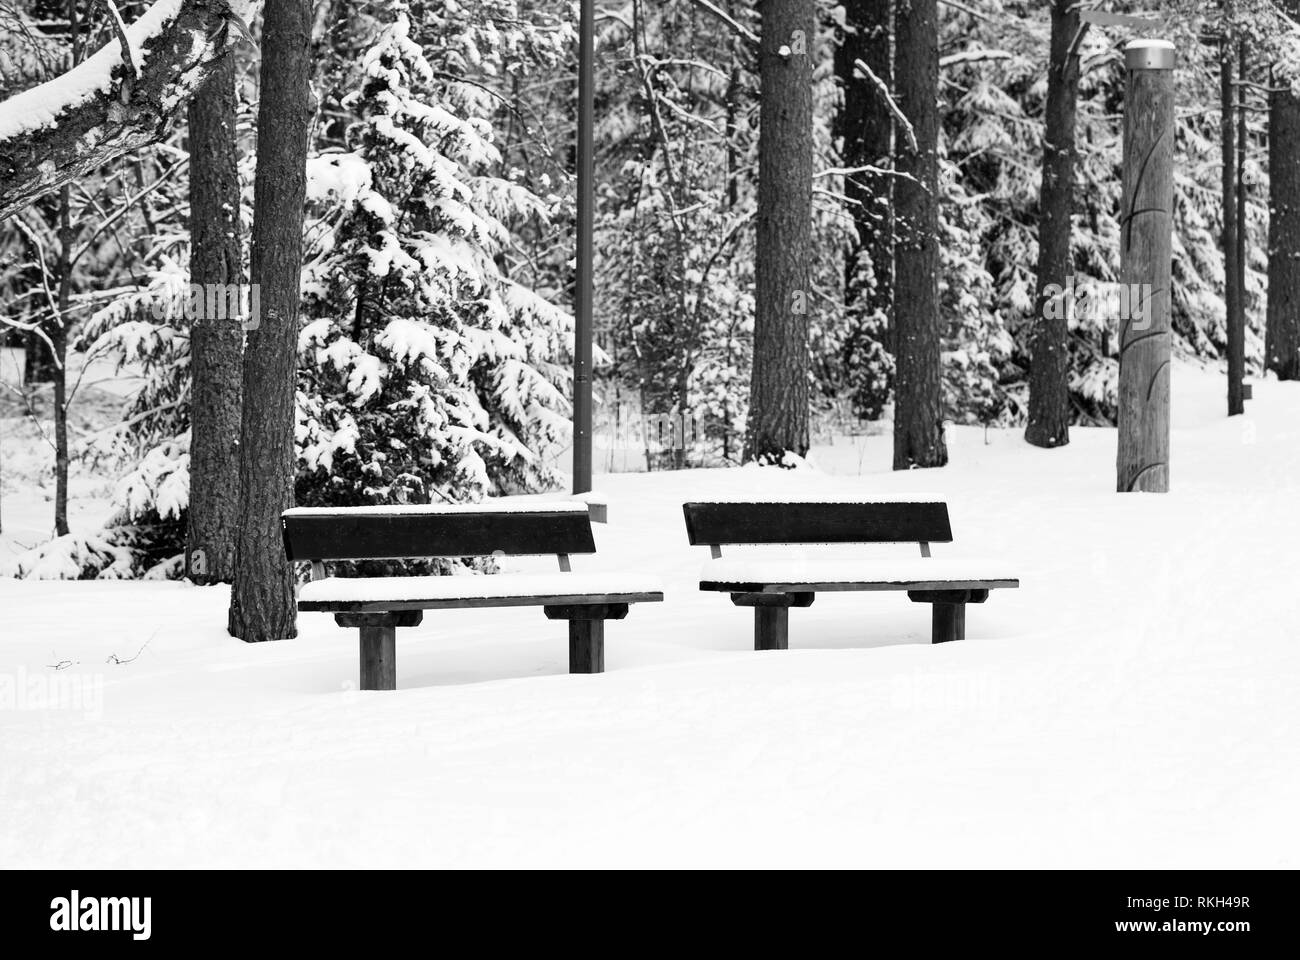 Snowy bench in a forest at winter Stock Photo